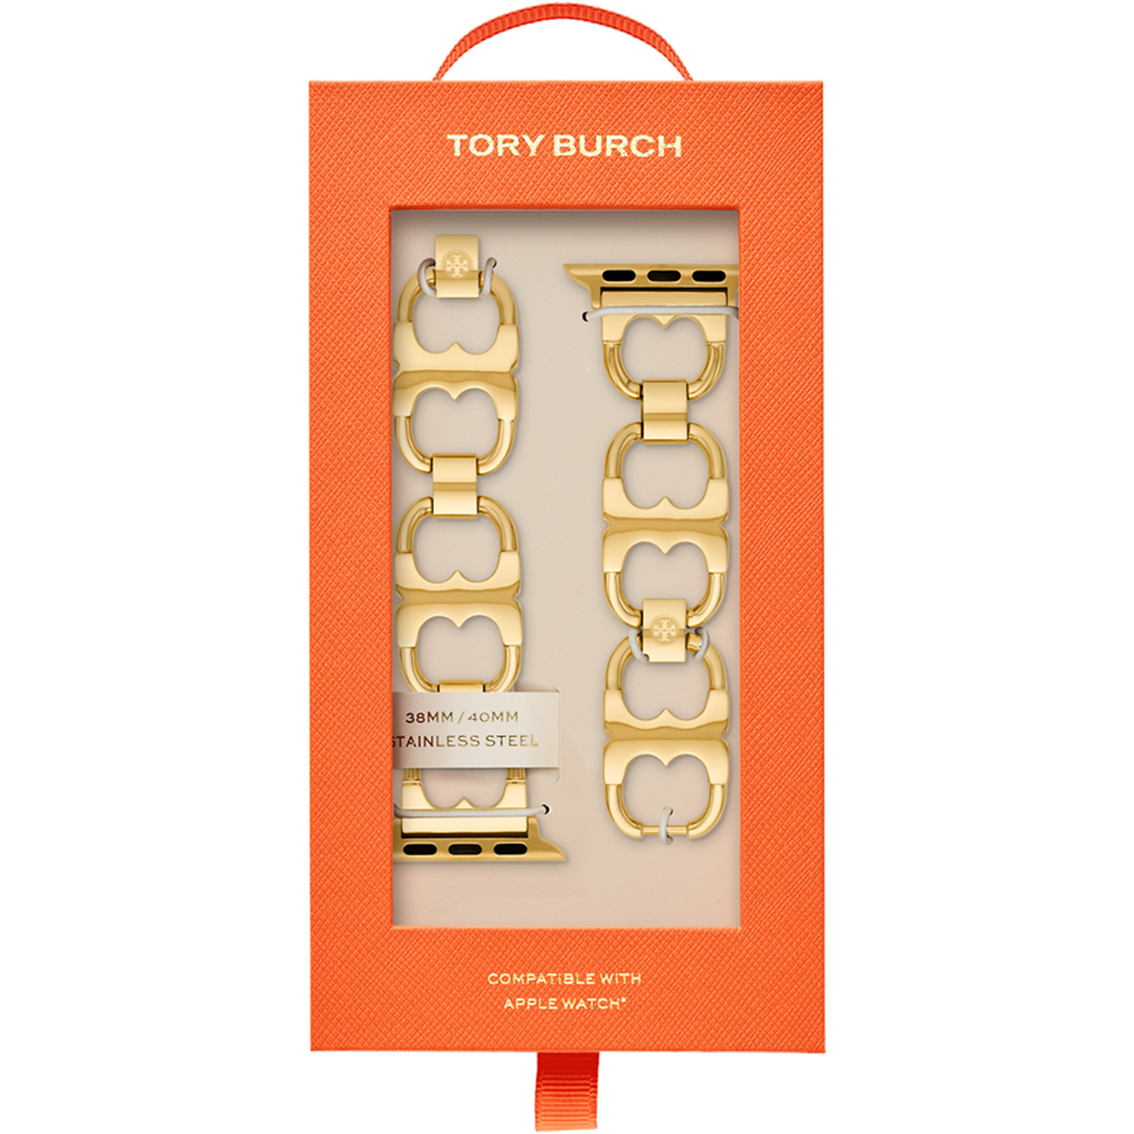 Tory Burch Women's McGraw Gold Stainless Steel 38mm Bands for Apple Watches TBS0013 - Image 4 of 4